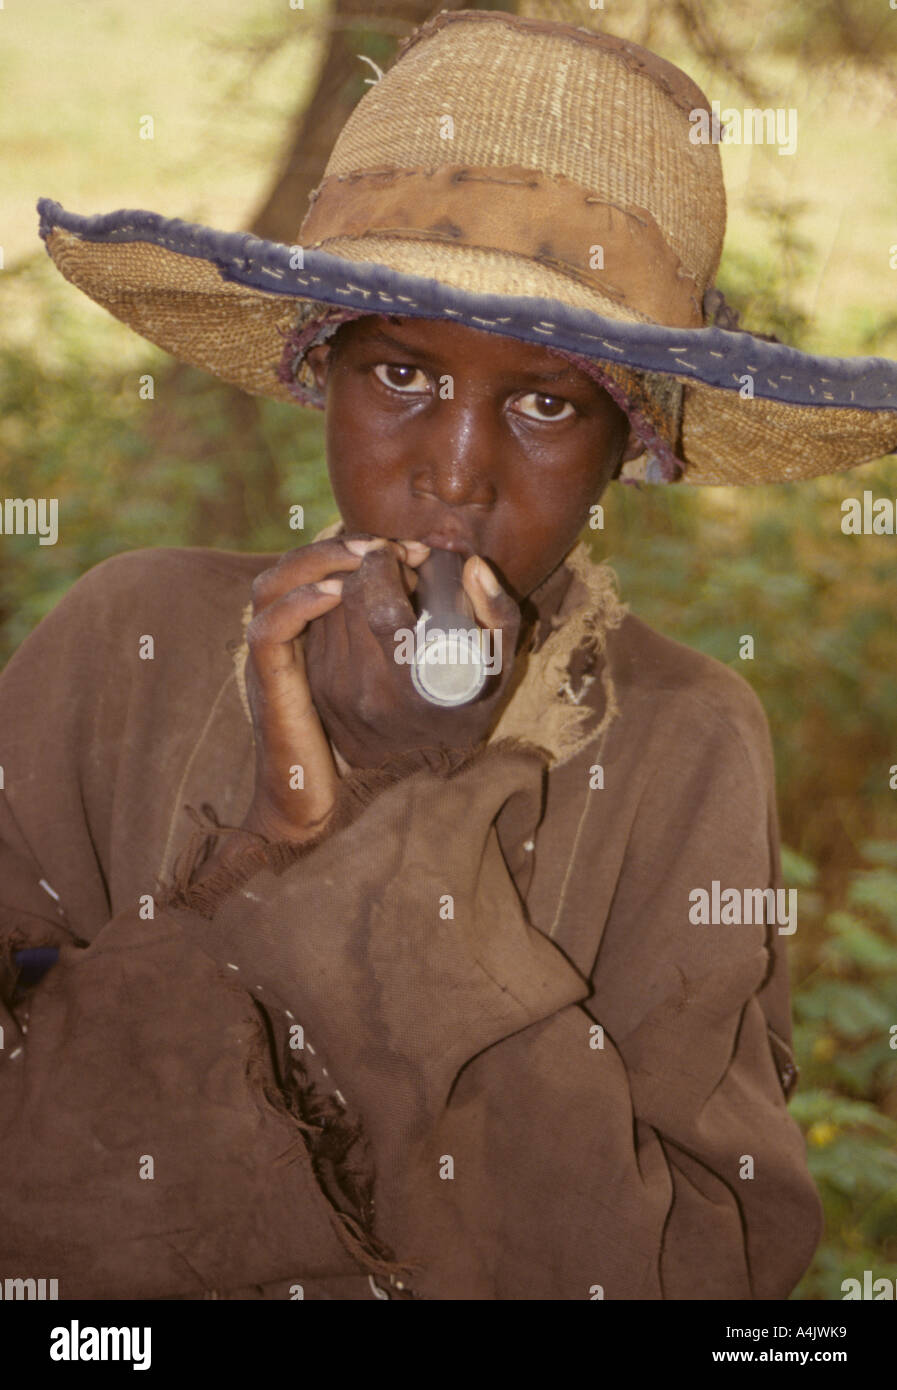 Boy with Drinking Tube Filter to Avoid Ingesting Guinea Worm, Niger. Stock Photo